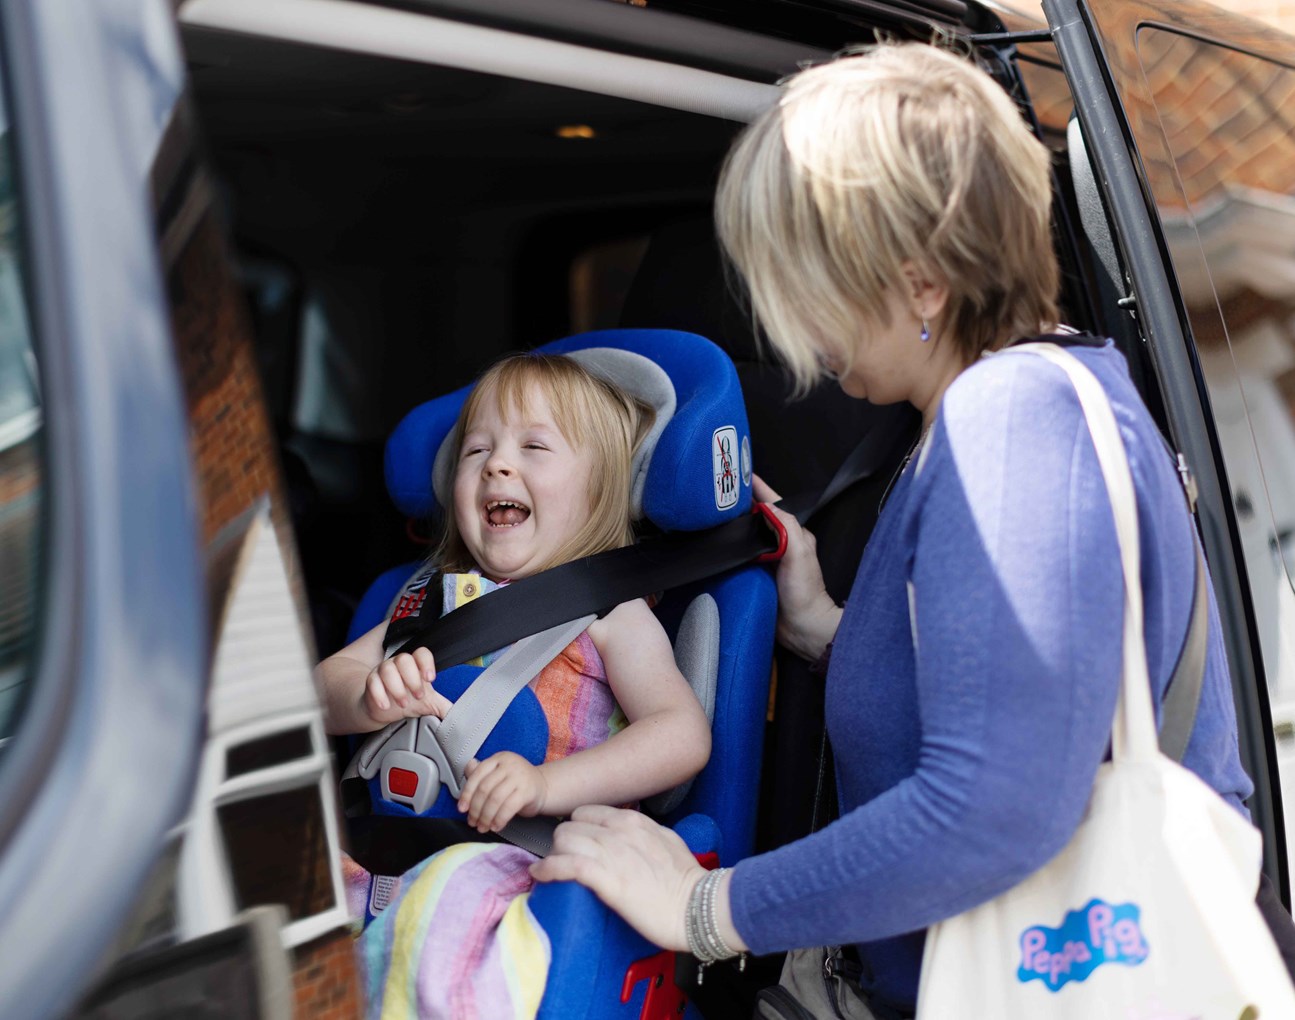 Poppy's car door is slid open. Poppy has a big smile on her face. Her mum is carefully strapping her into car seat before they take a trip out for the day.